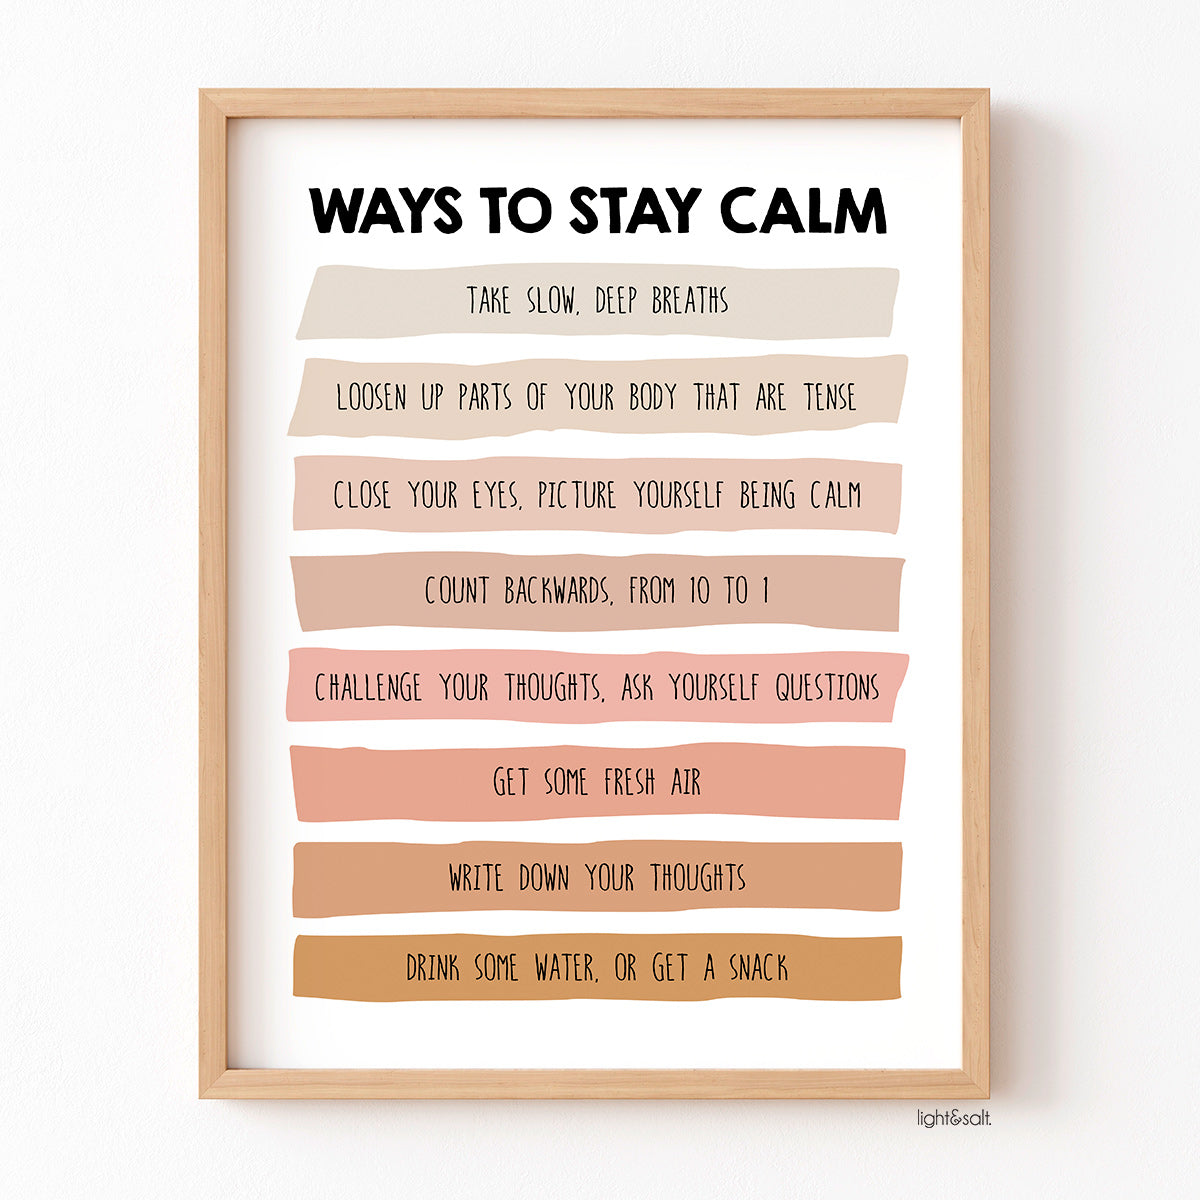 Ways to stay calm, anxiety poster